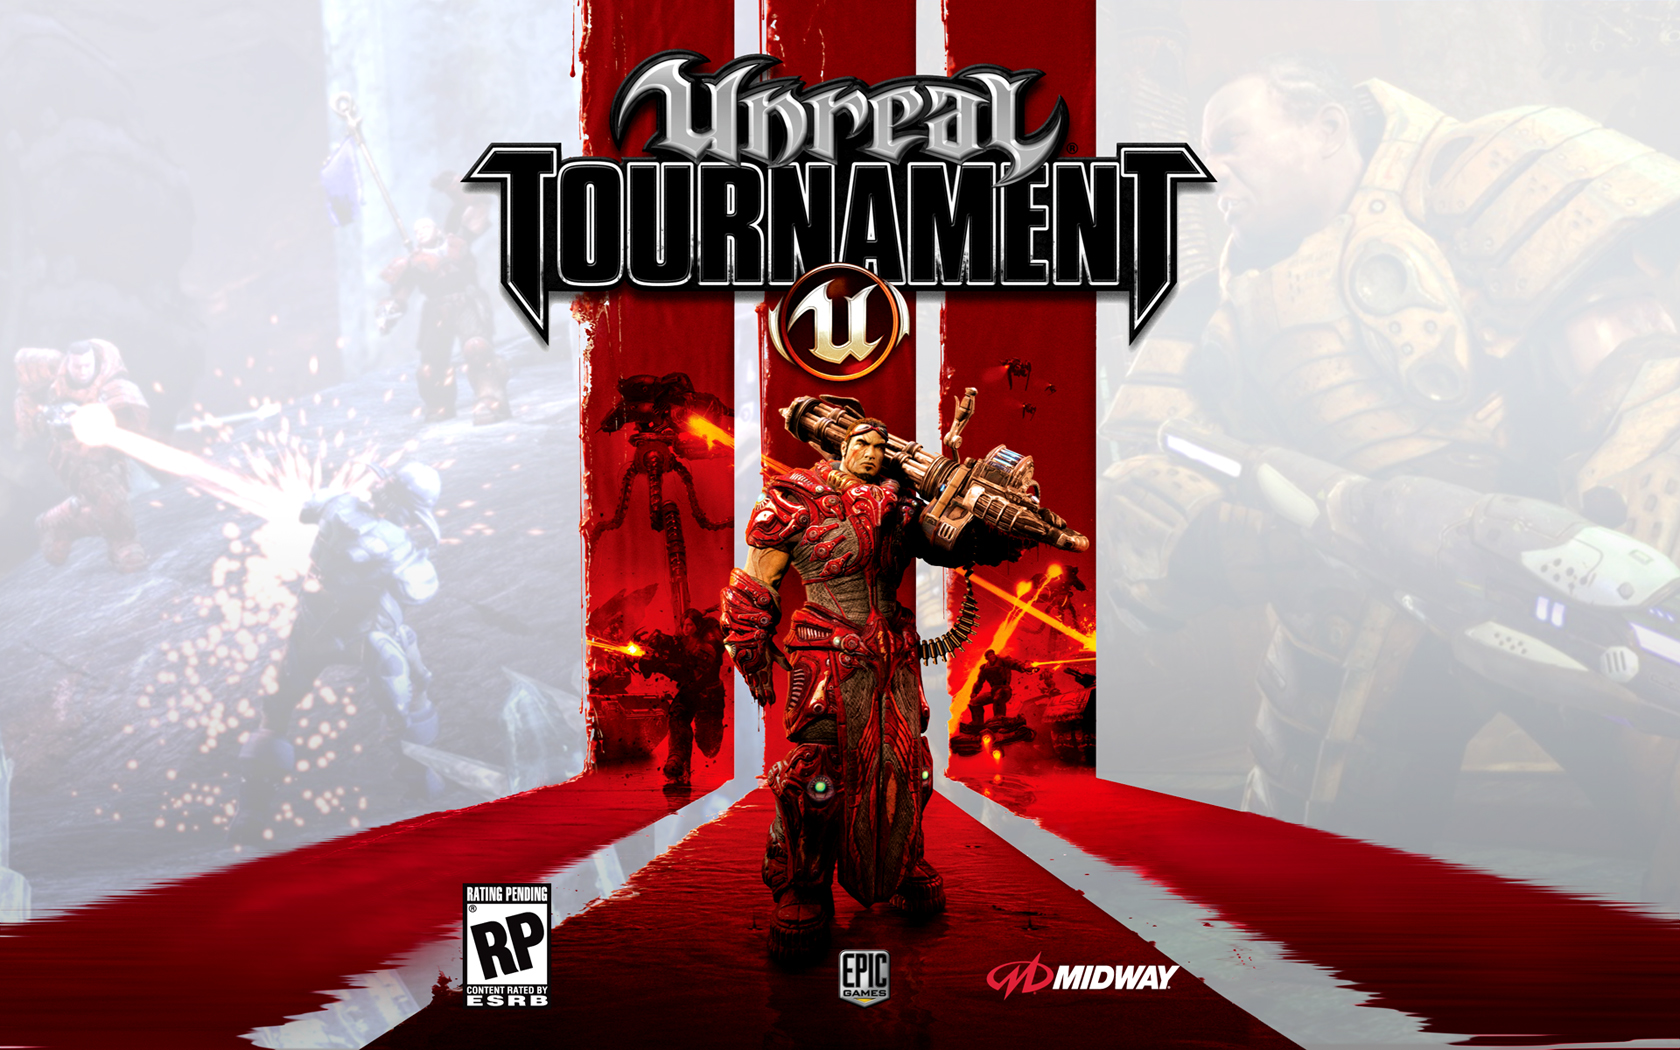 http://www.gamer.ru/system/attached_images/images/000/044/152/original/unreal_tournament_3_01.jpg